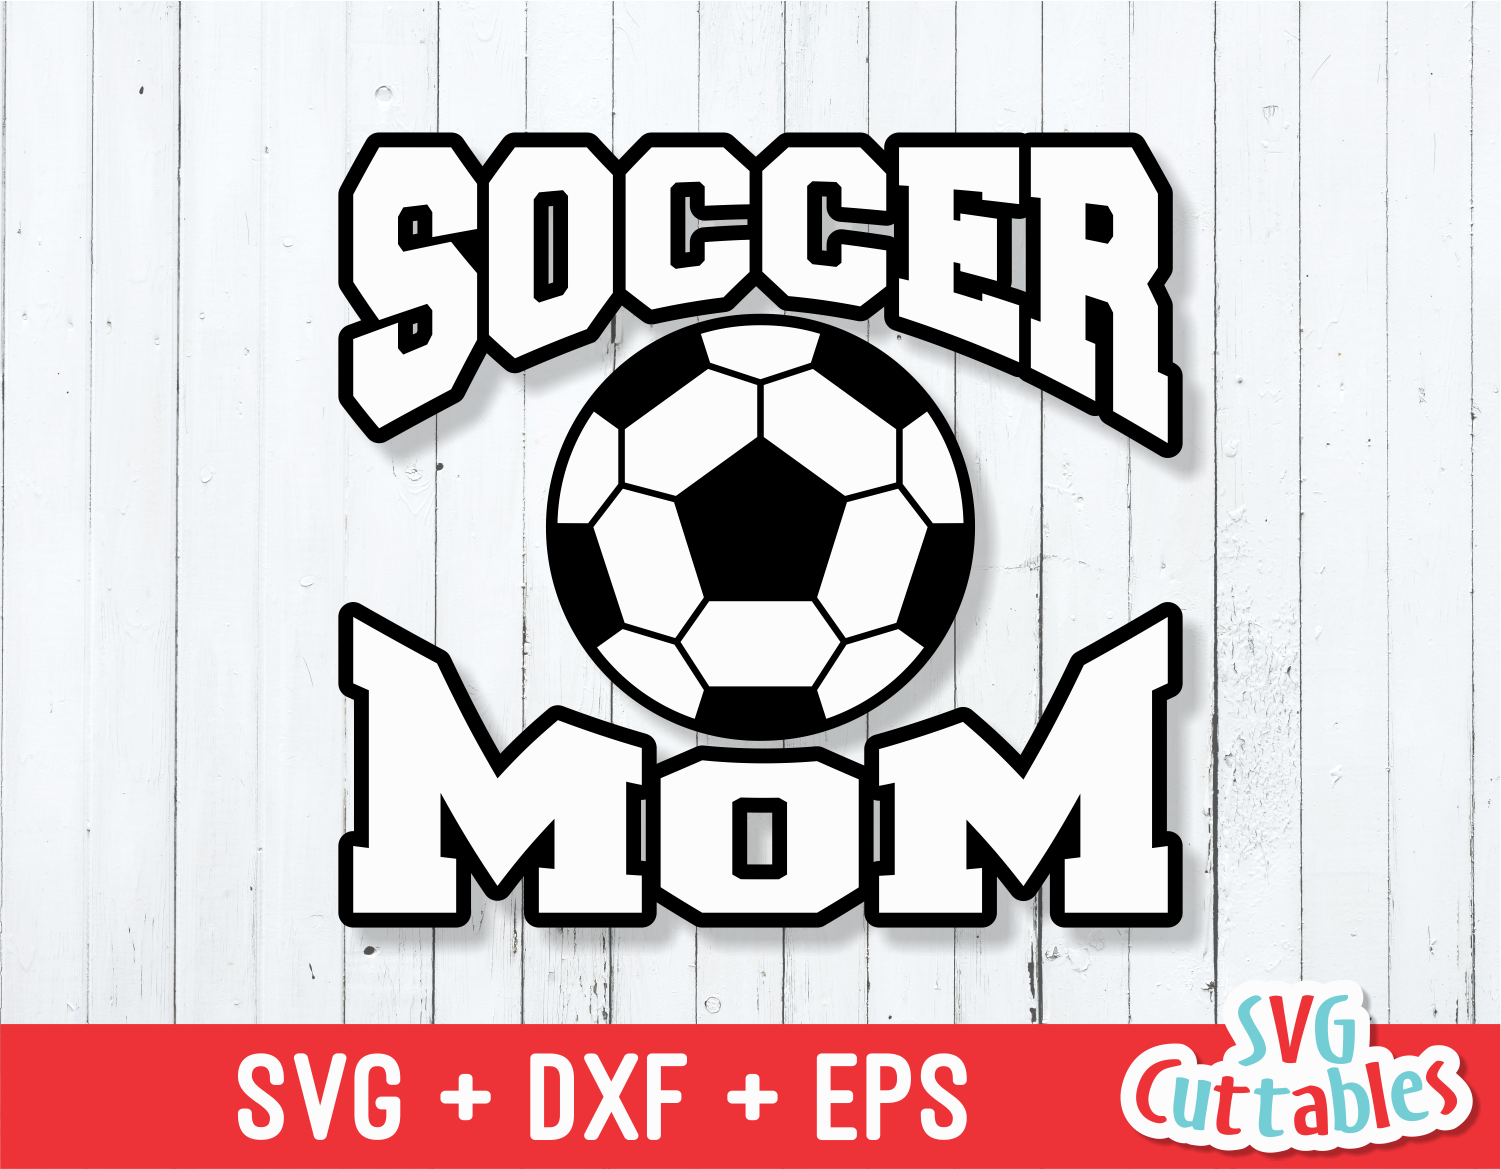 What Materials Can You Use With Cricut? - The Soccer Mom Blog